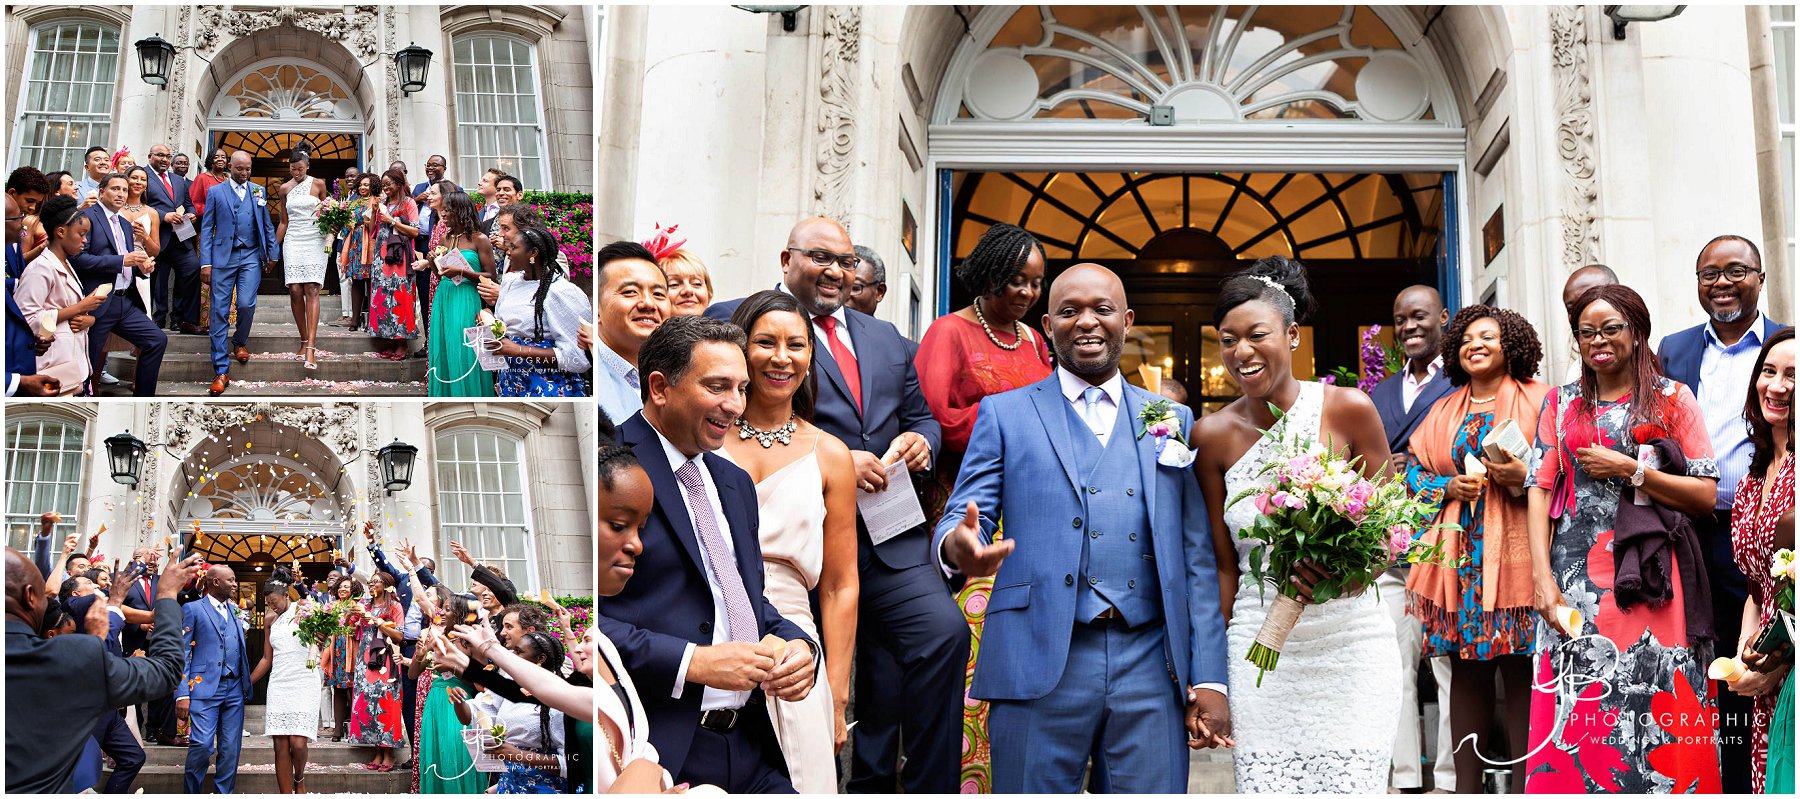 nothing but joy as the bride and groom are received by their guests on the steps of the iconic Chelea Old Town Hall to celebrate the end of the marriage ceremony